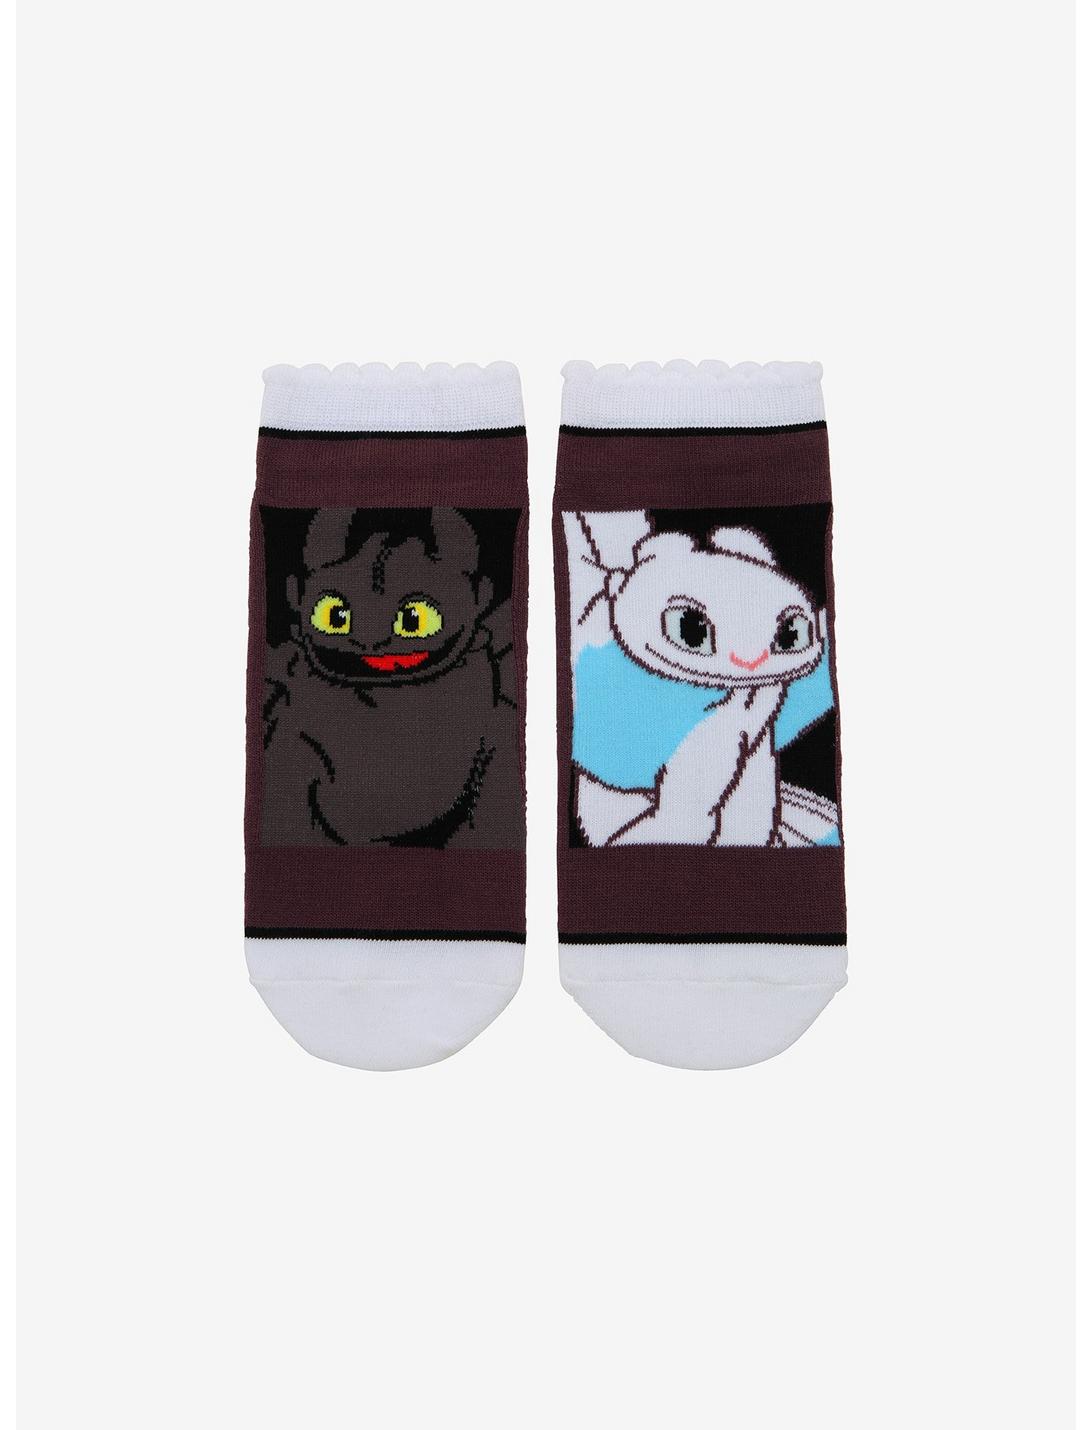 How To Train Your Dragon: The Hidden World Toothless & Light Fury Scallop Edge No-Show Socks, , hi-res